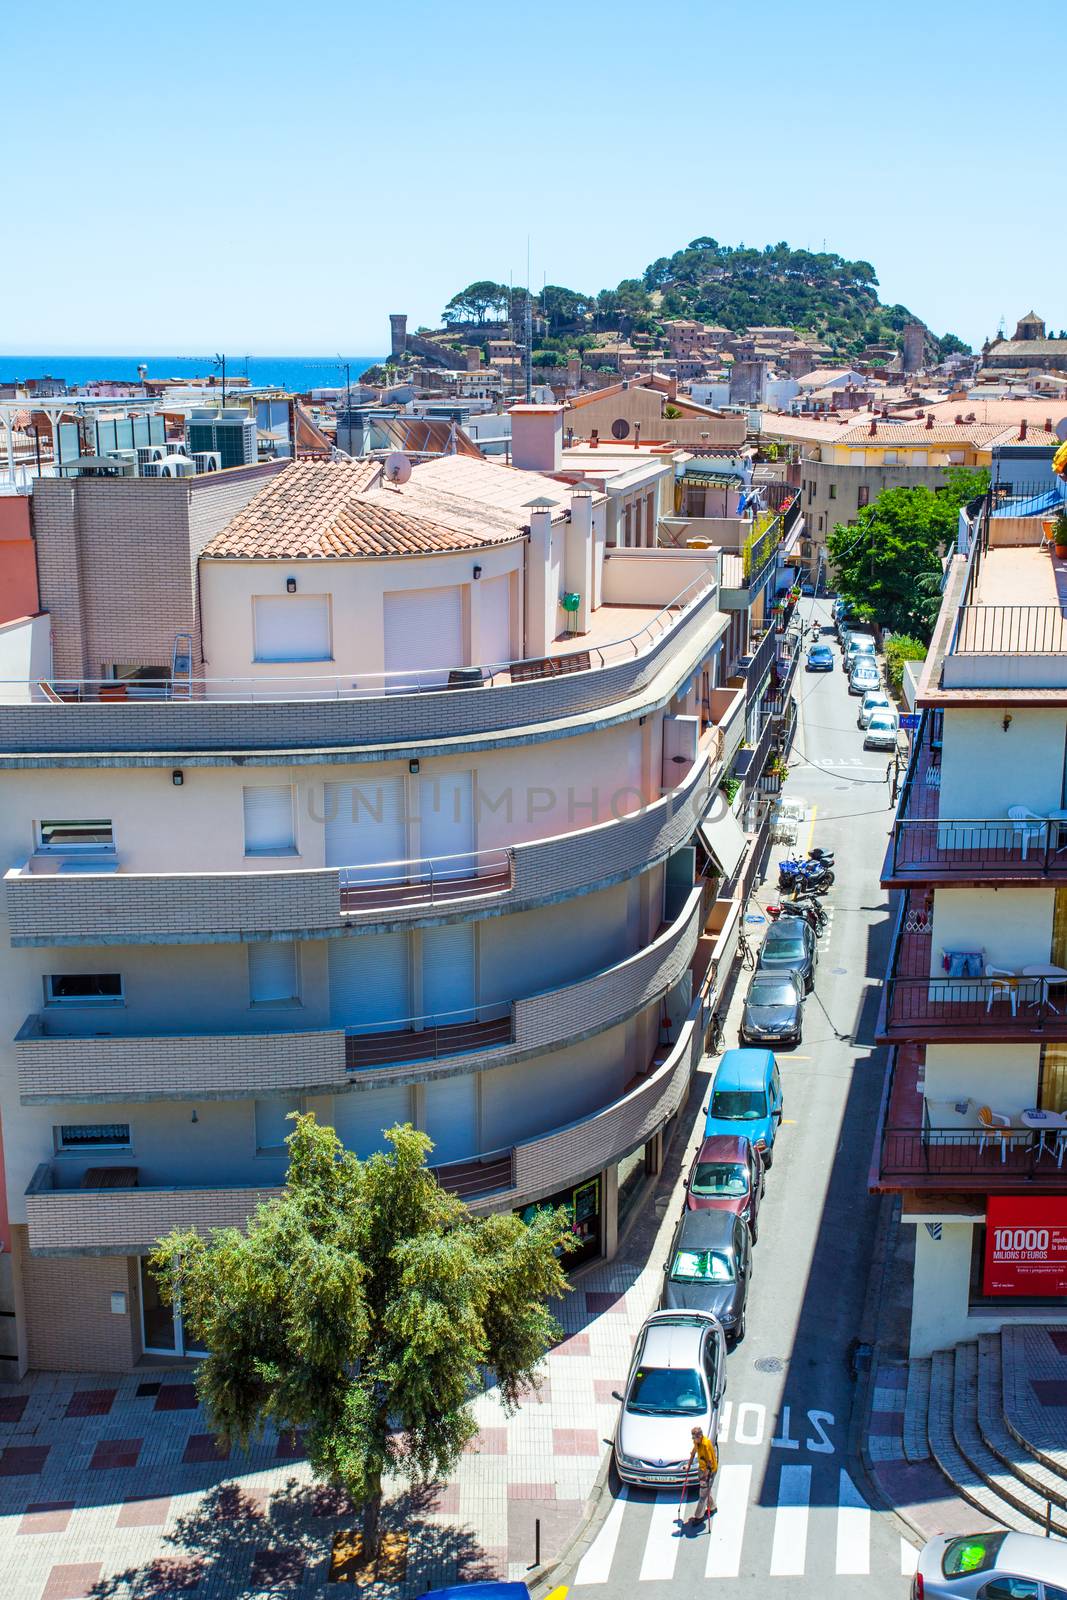 Spain, Catalunya, Tossa de Mar, 06.20.2013, the panorama of the town with the Carrer Tomas Barber street and the Mediterranean Sea with the old medieval fortress Villa Vella, editorial use only